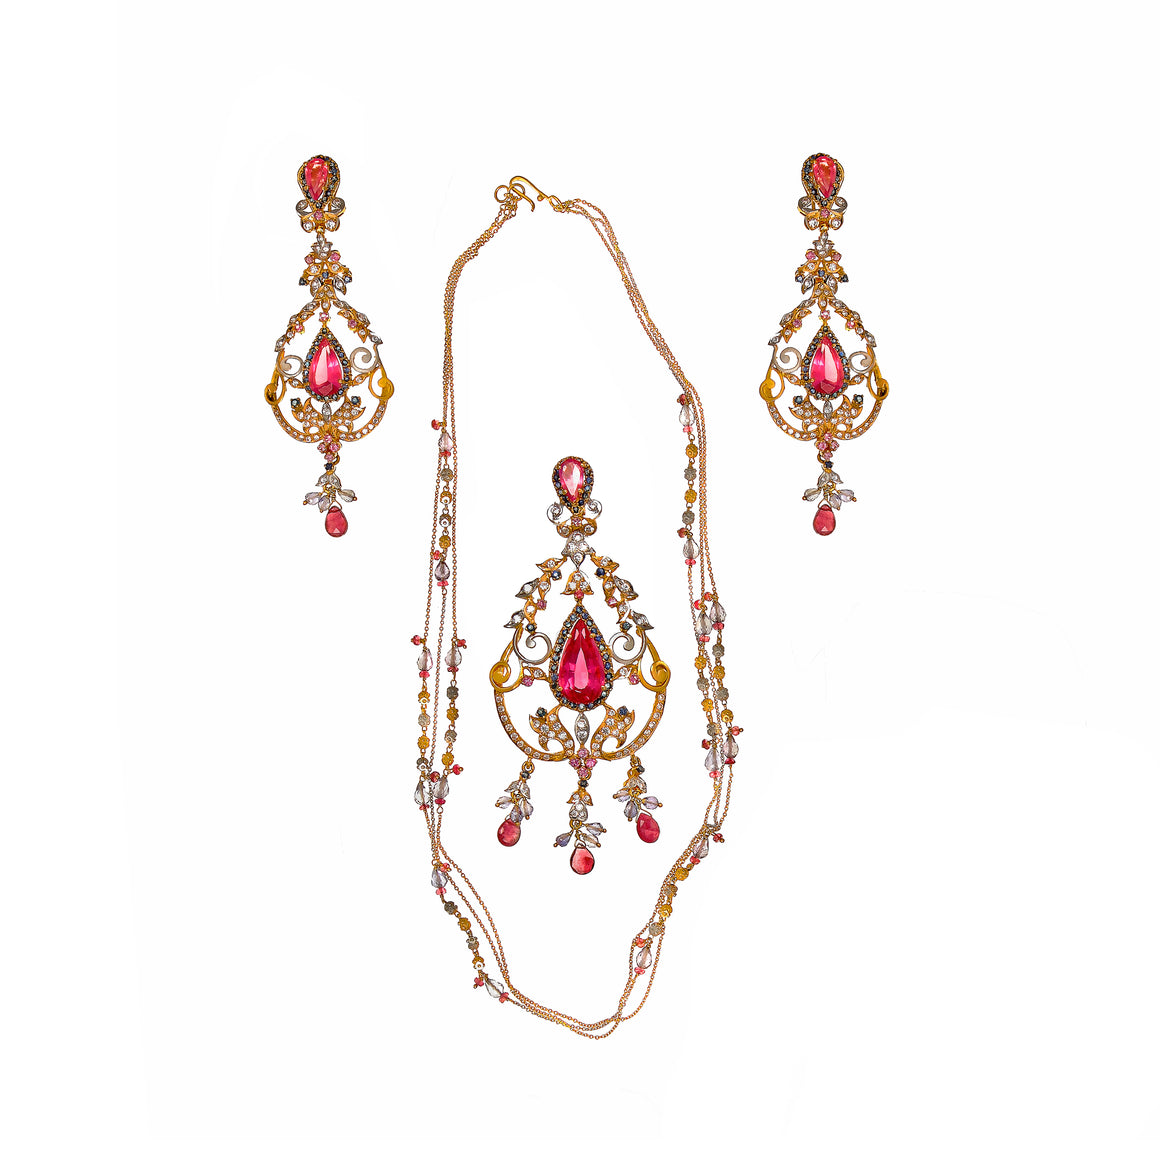 Glamorous Ruby and Tourmaline String Set made in 22k gold